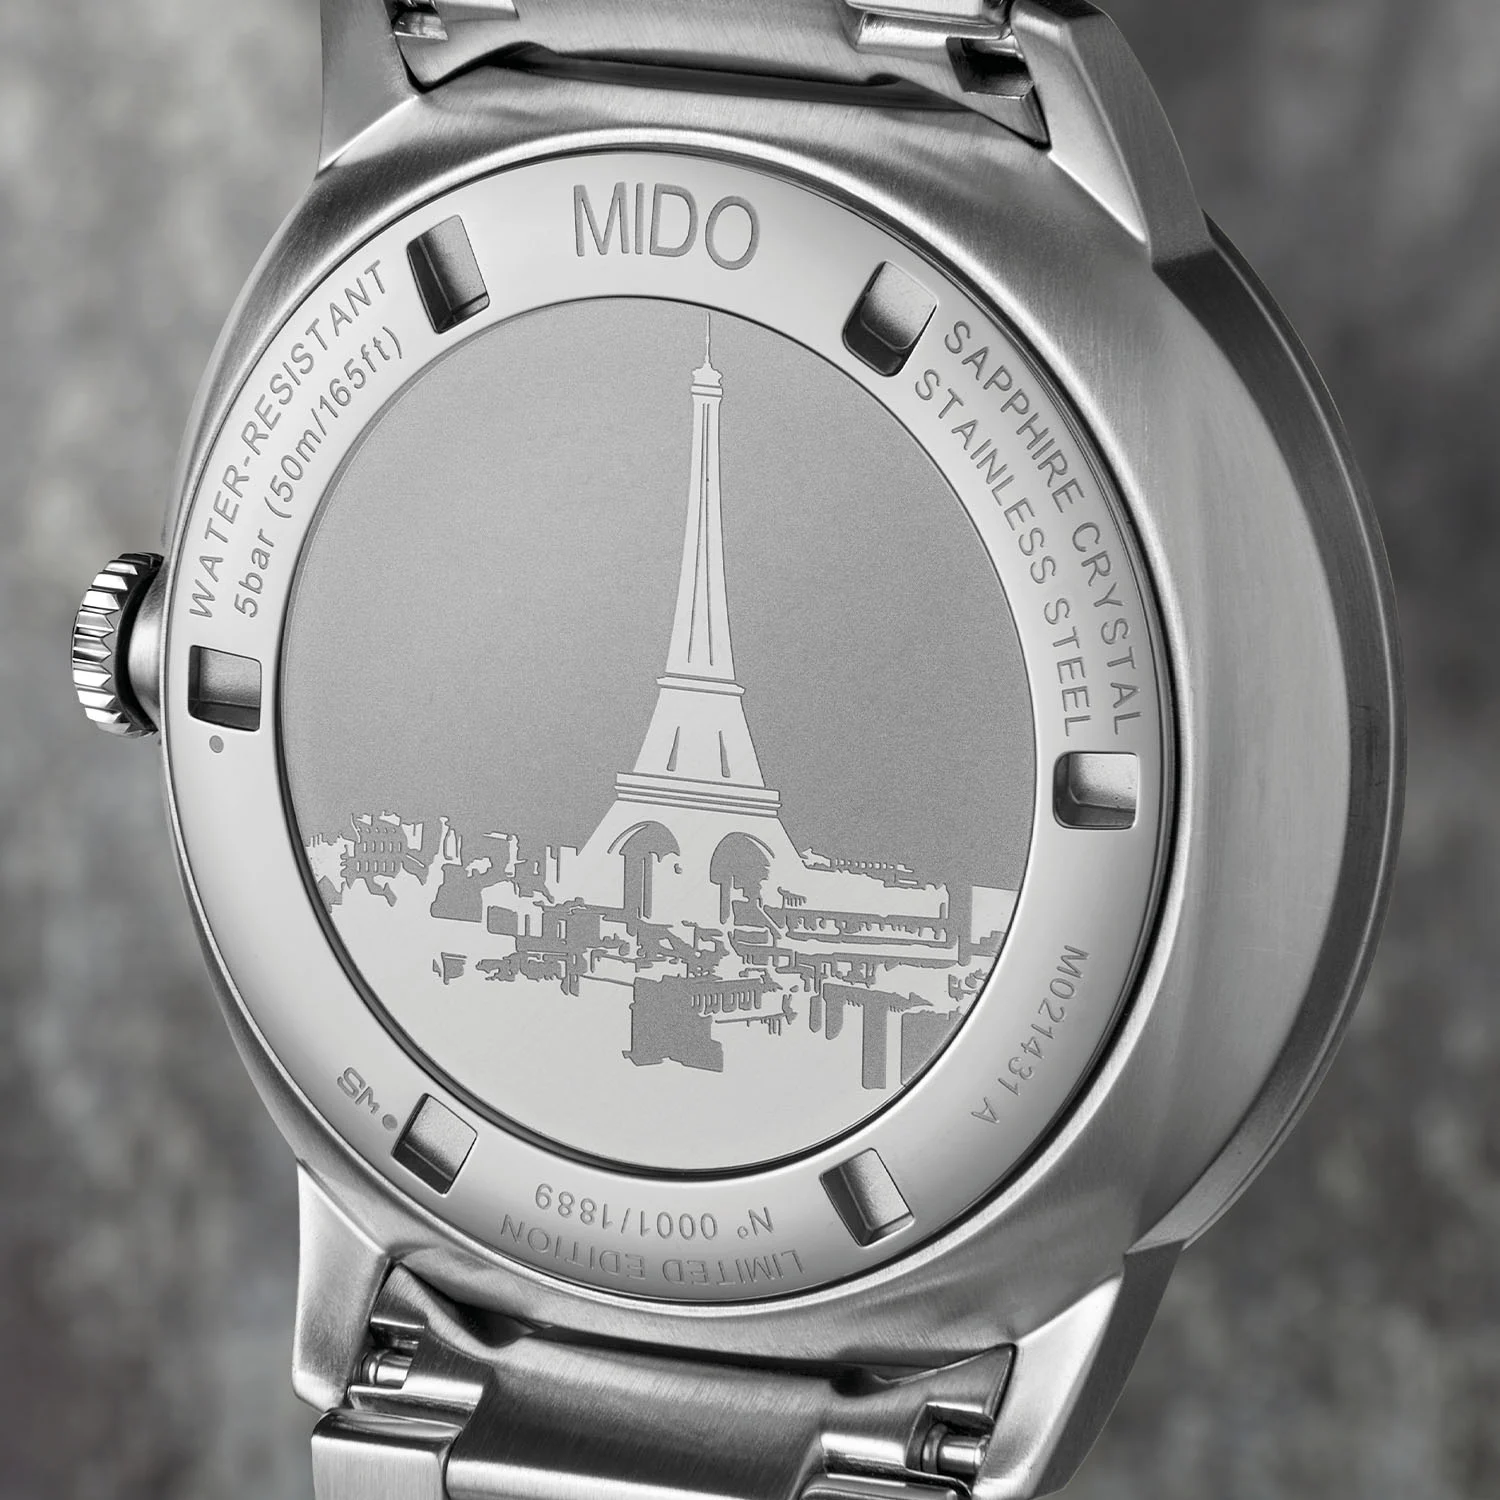 Mido Commander Inspired by Architecture 20th Anniversary Limited Edition Chronometer Silicium Eiffel Tower 7